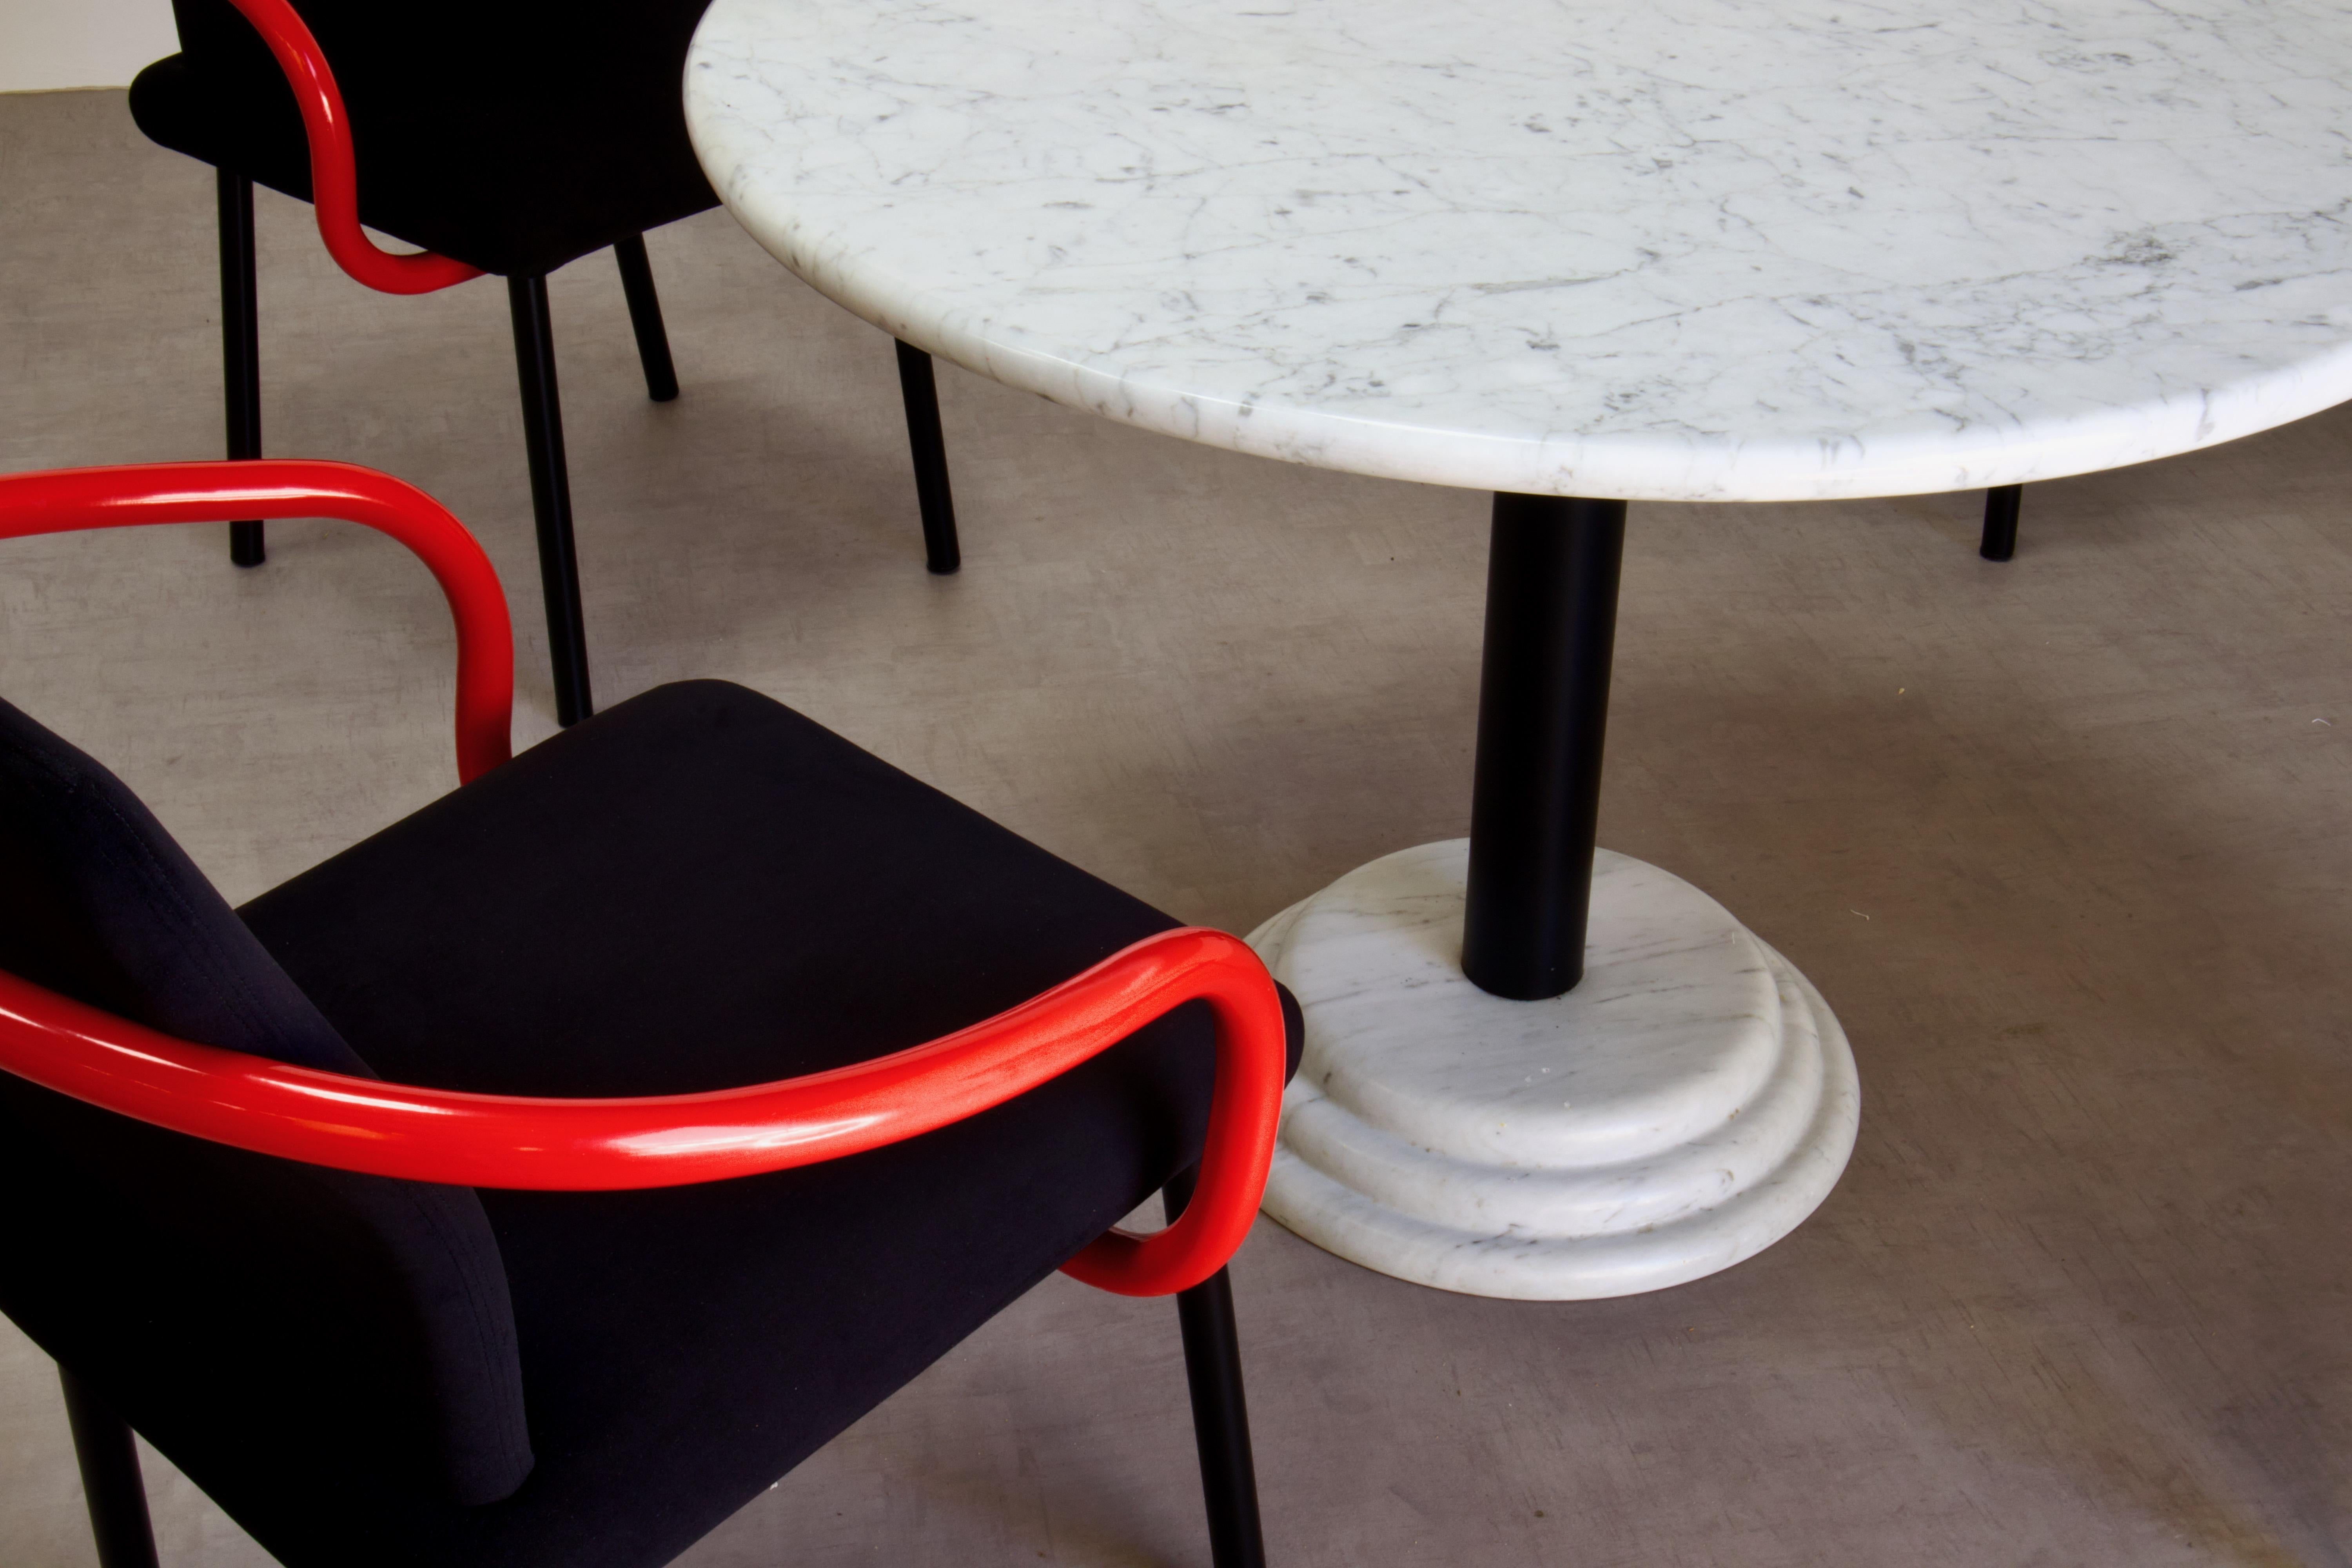 Lacquered Ettore Sottsass Mandarin Dining Set in Carrara Marble, Red & Black, 1986 Italy For Sale